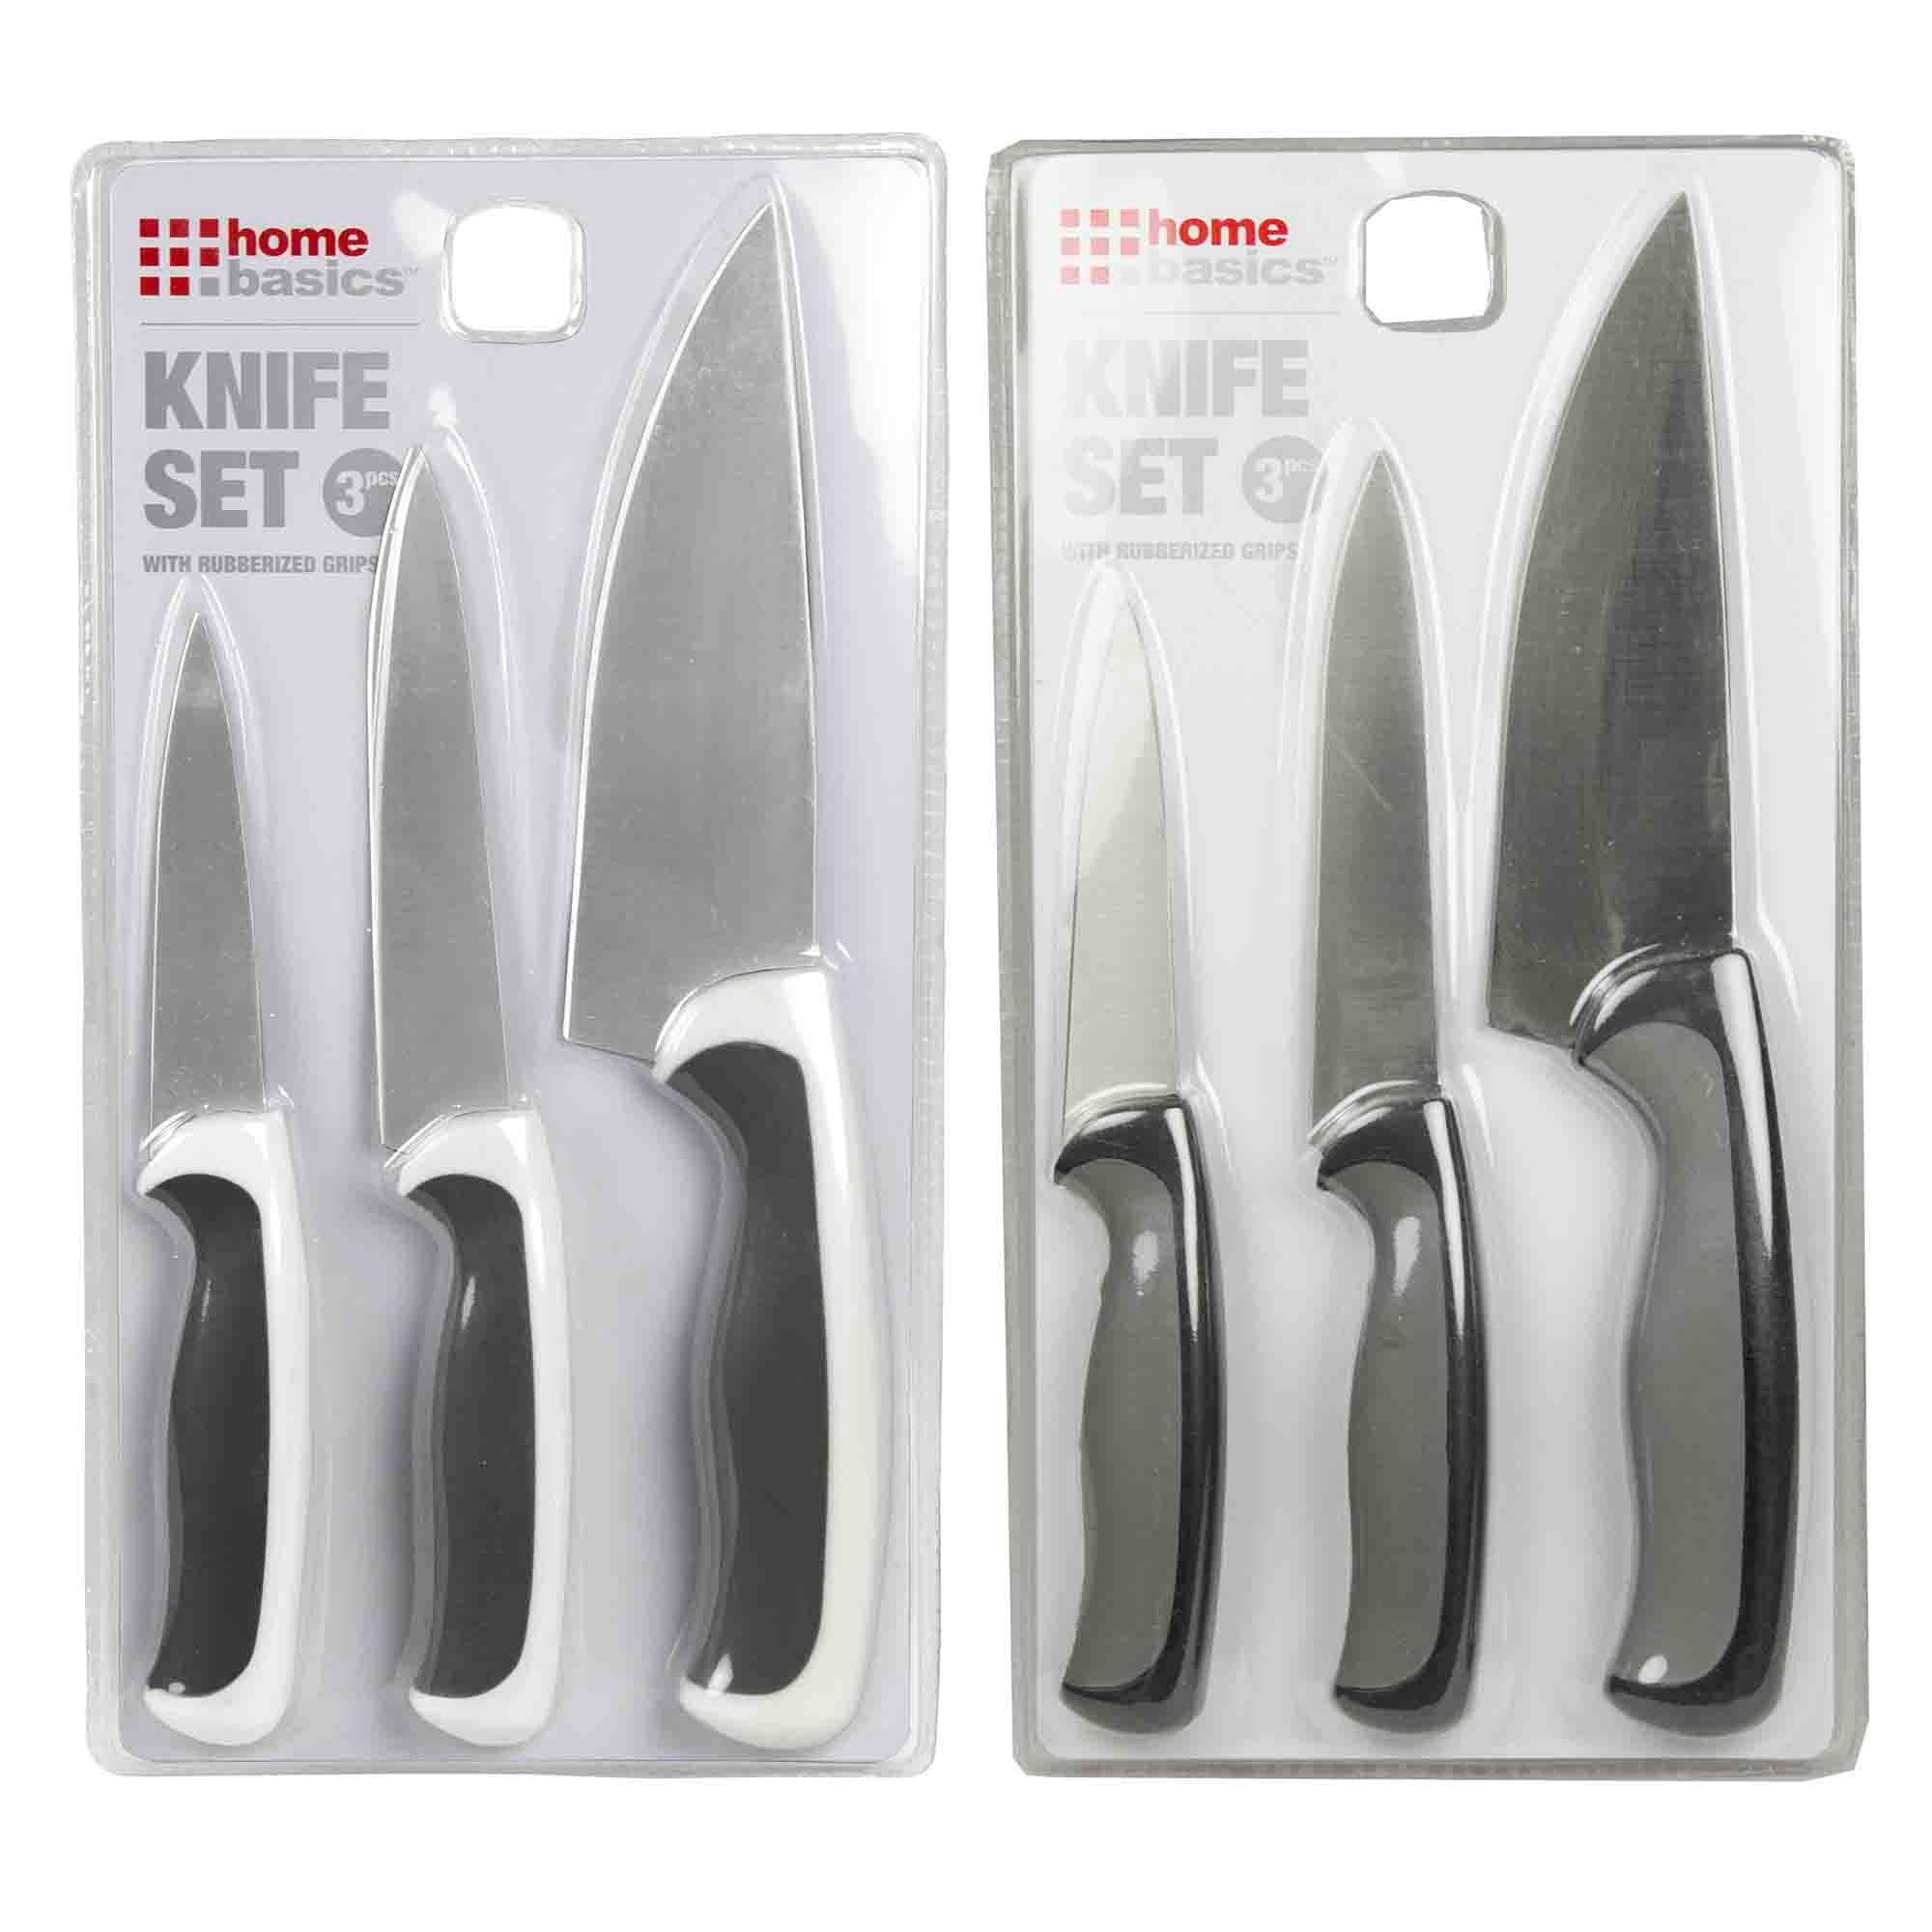 Home Basics Stainless Steel 3 Piece Knife Set - Assorted Colors